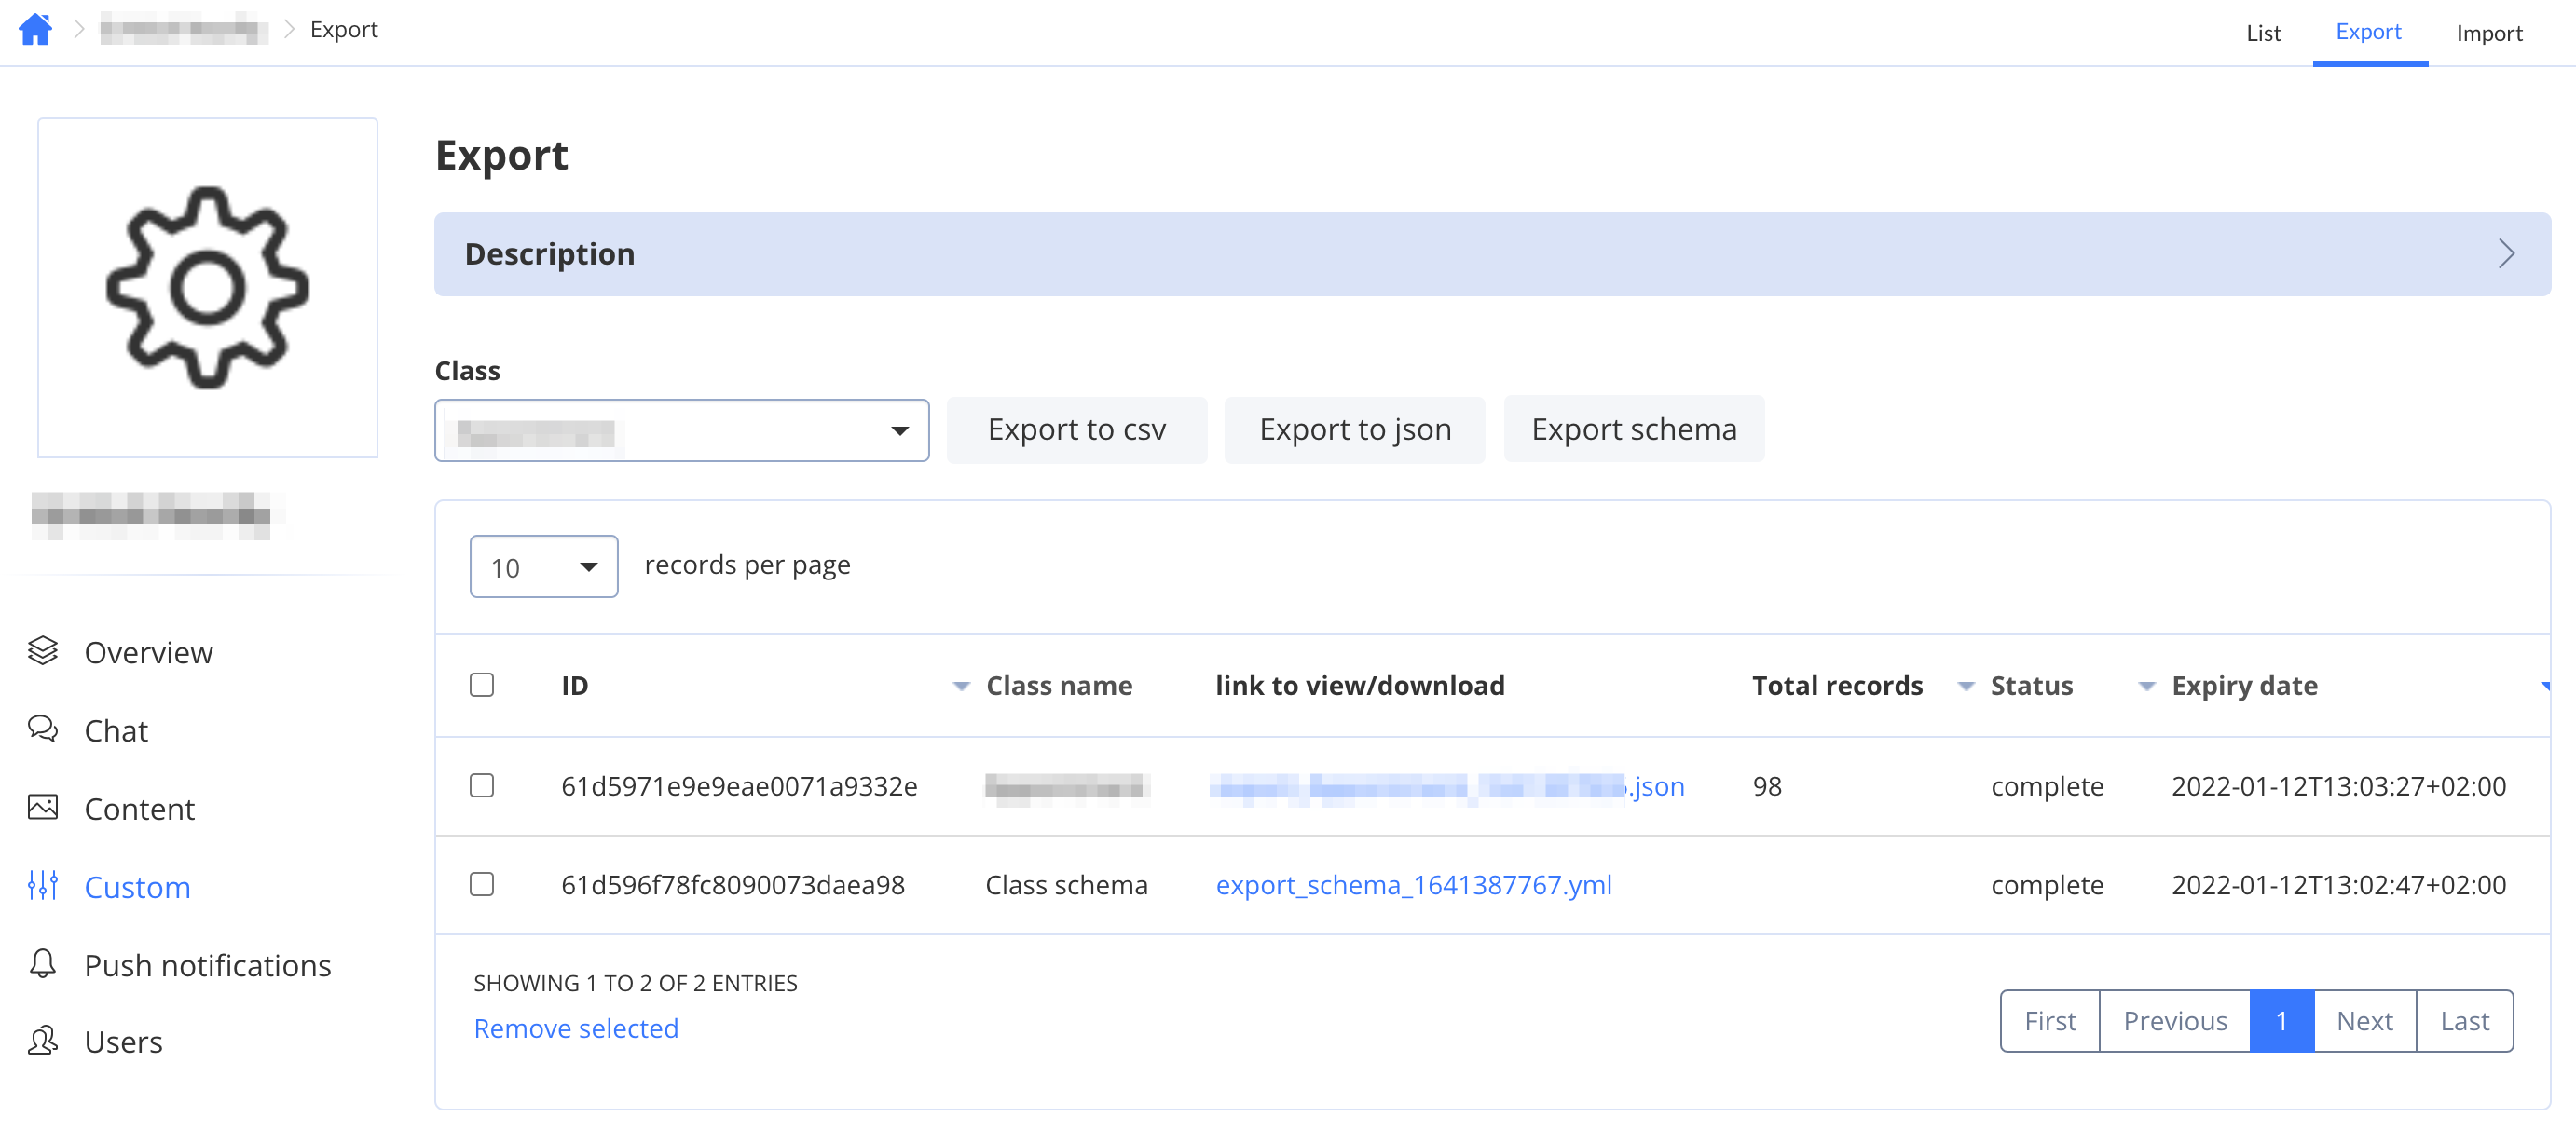 Custom objects-export page on QuickBlox dashboard